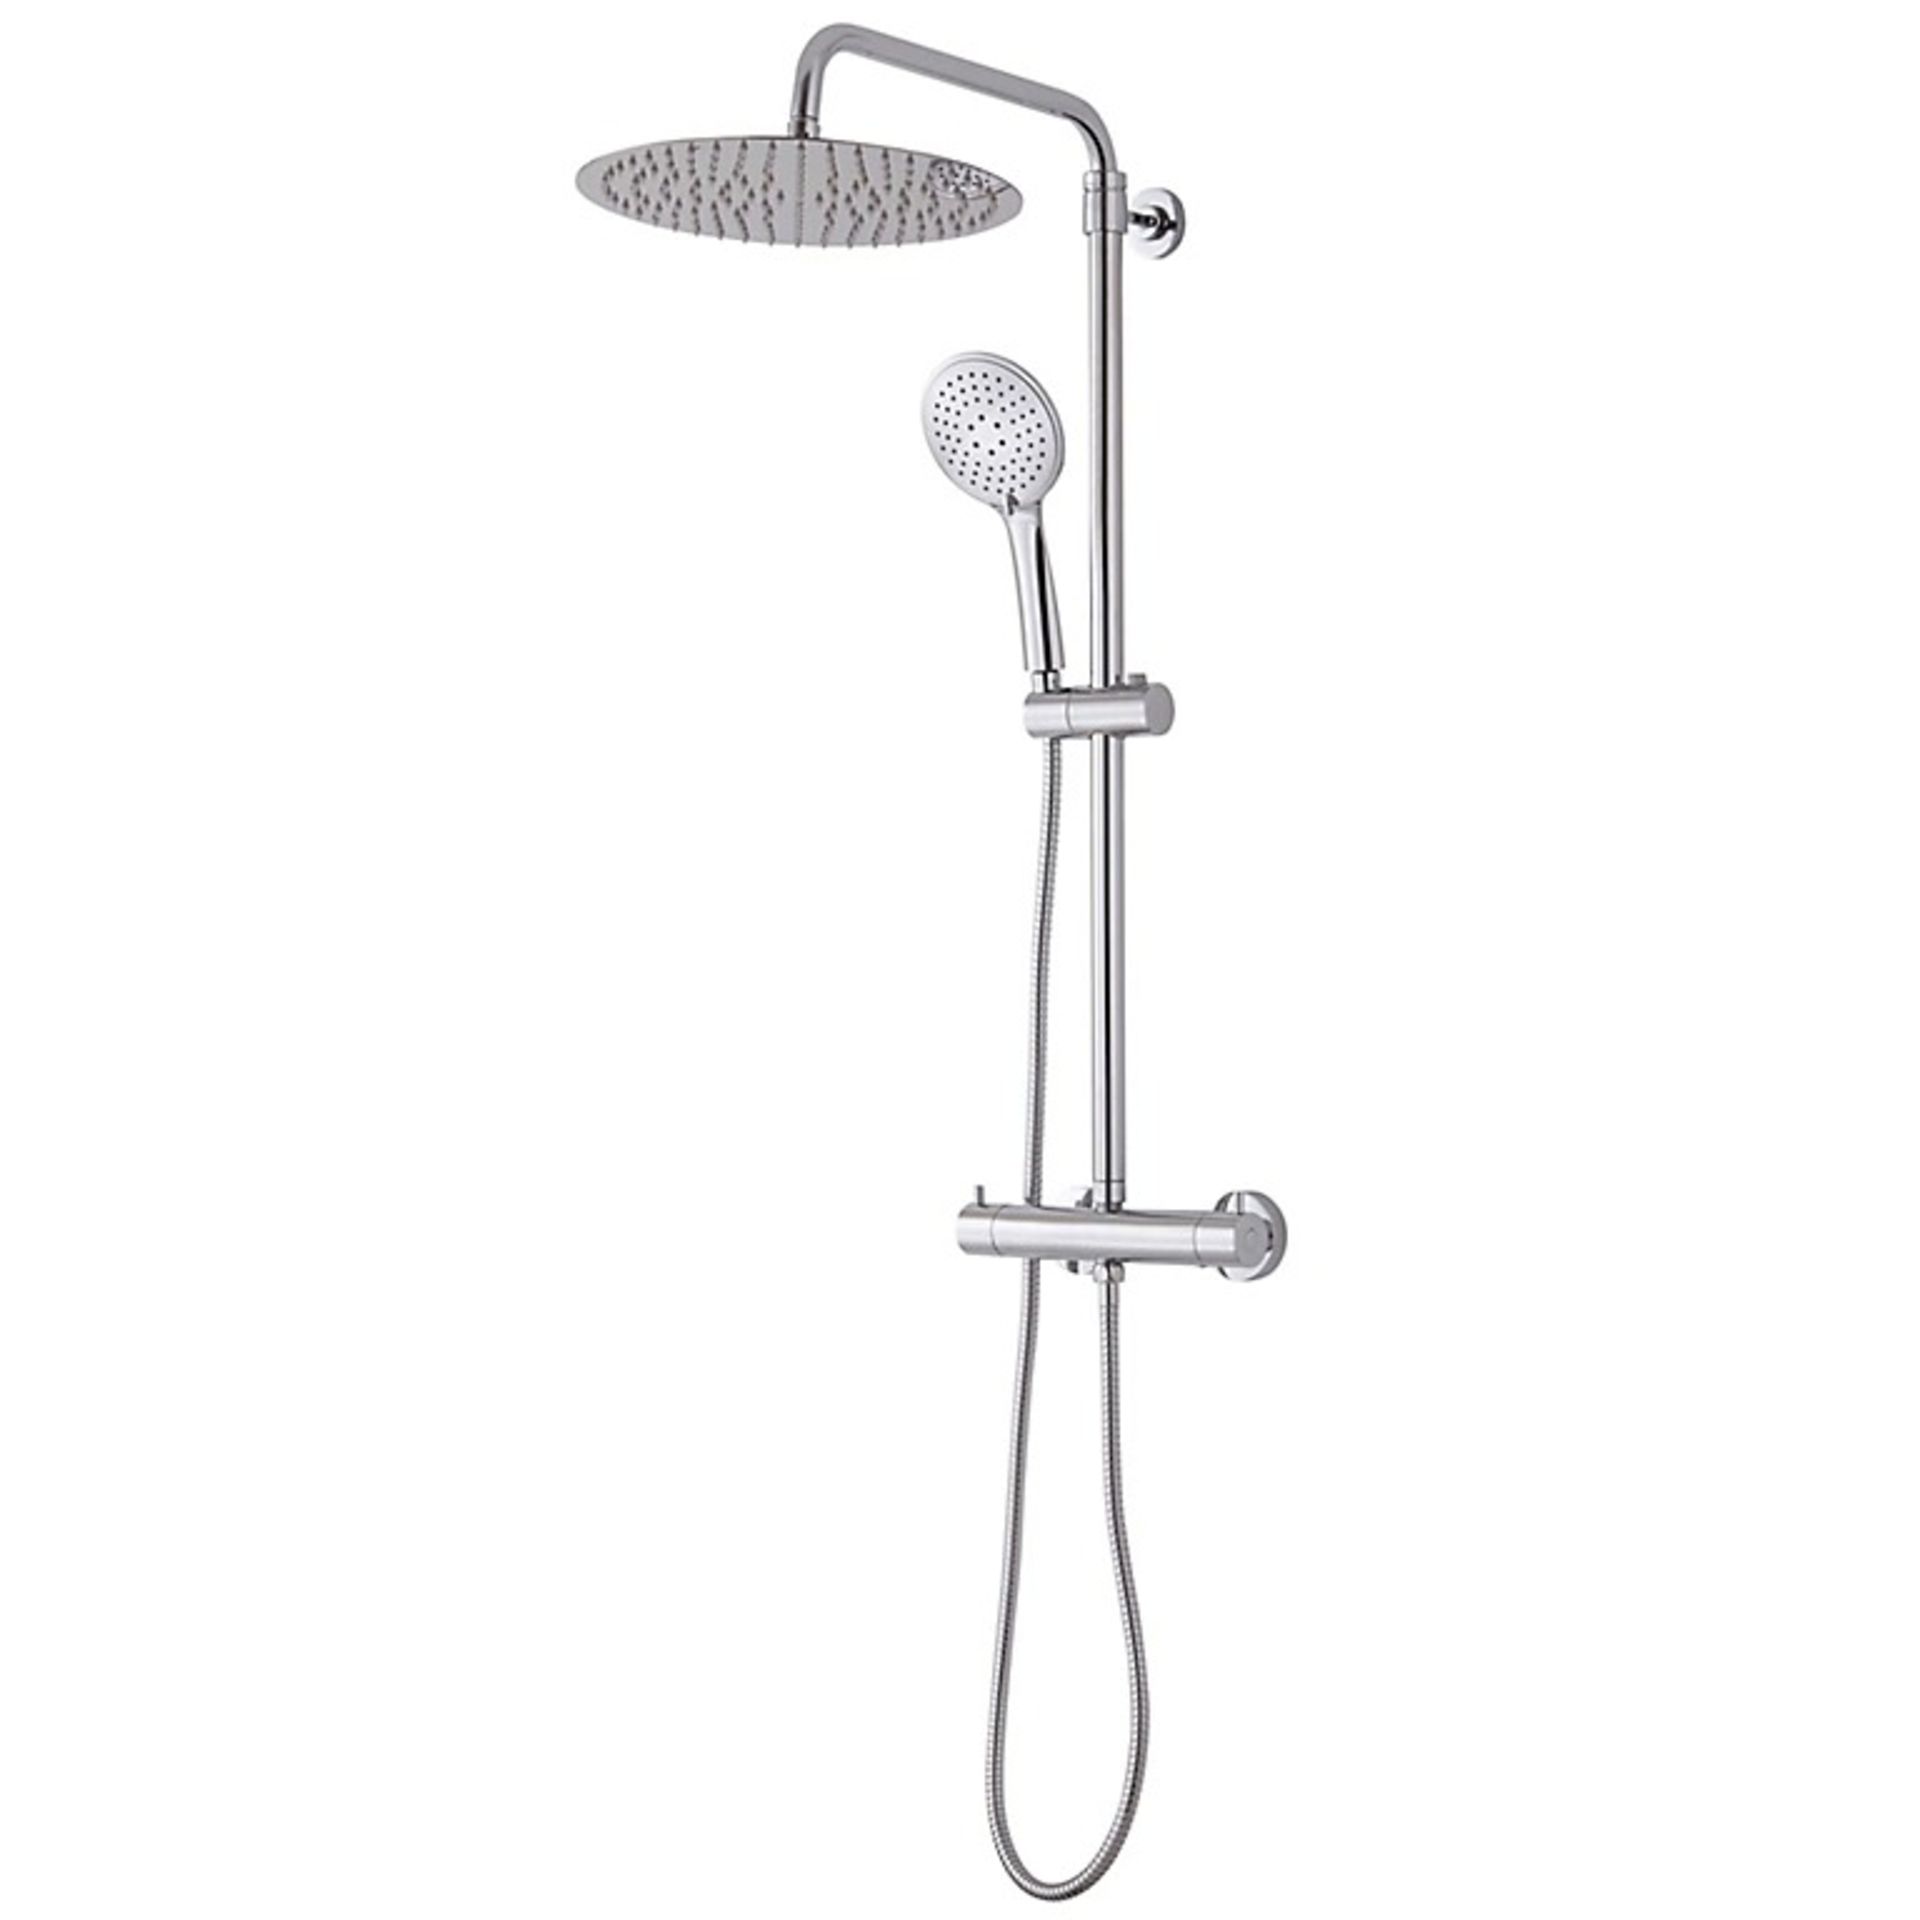 Cooke & Lewis CHROME effect Wall-mounted Thermostatic Mixer Shower - ER41